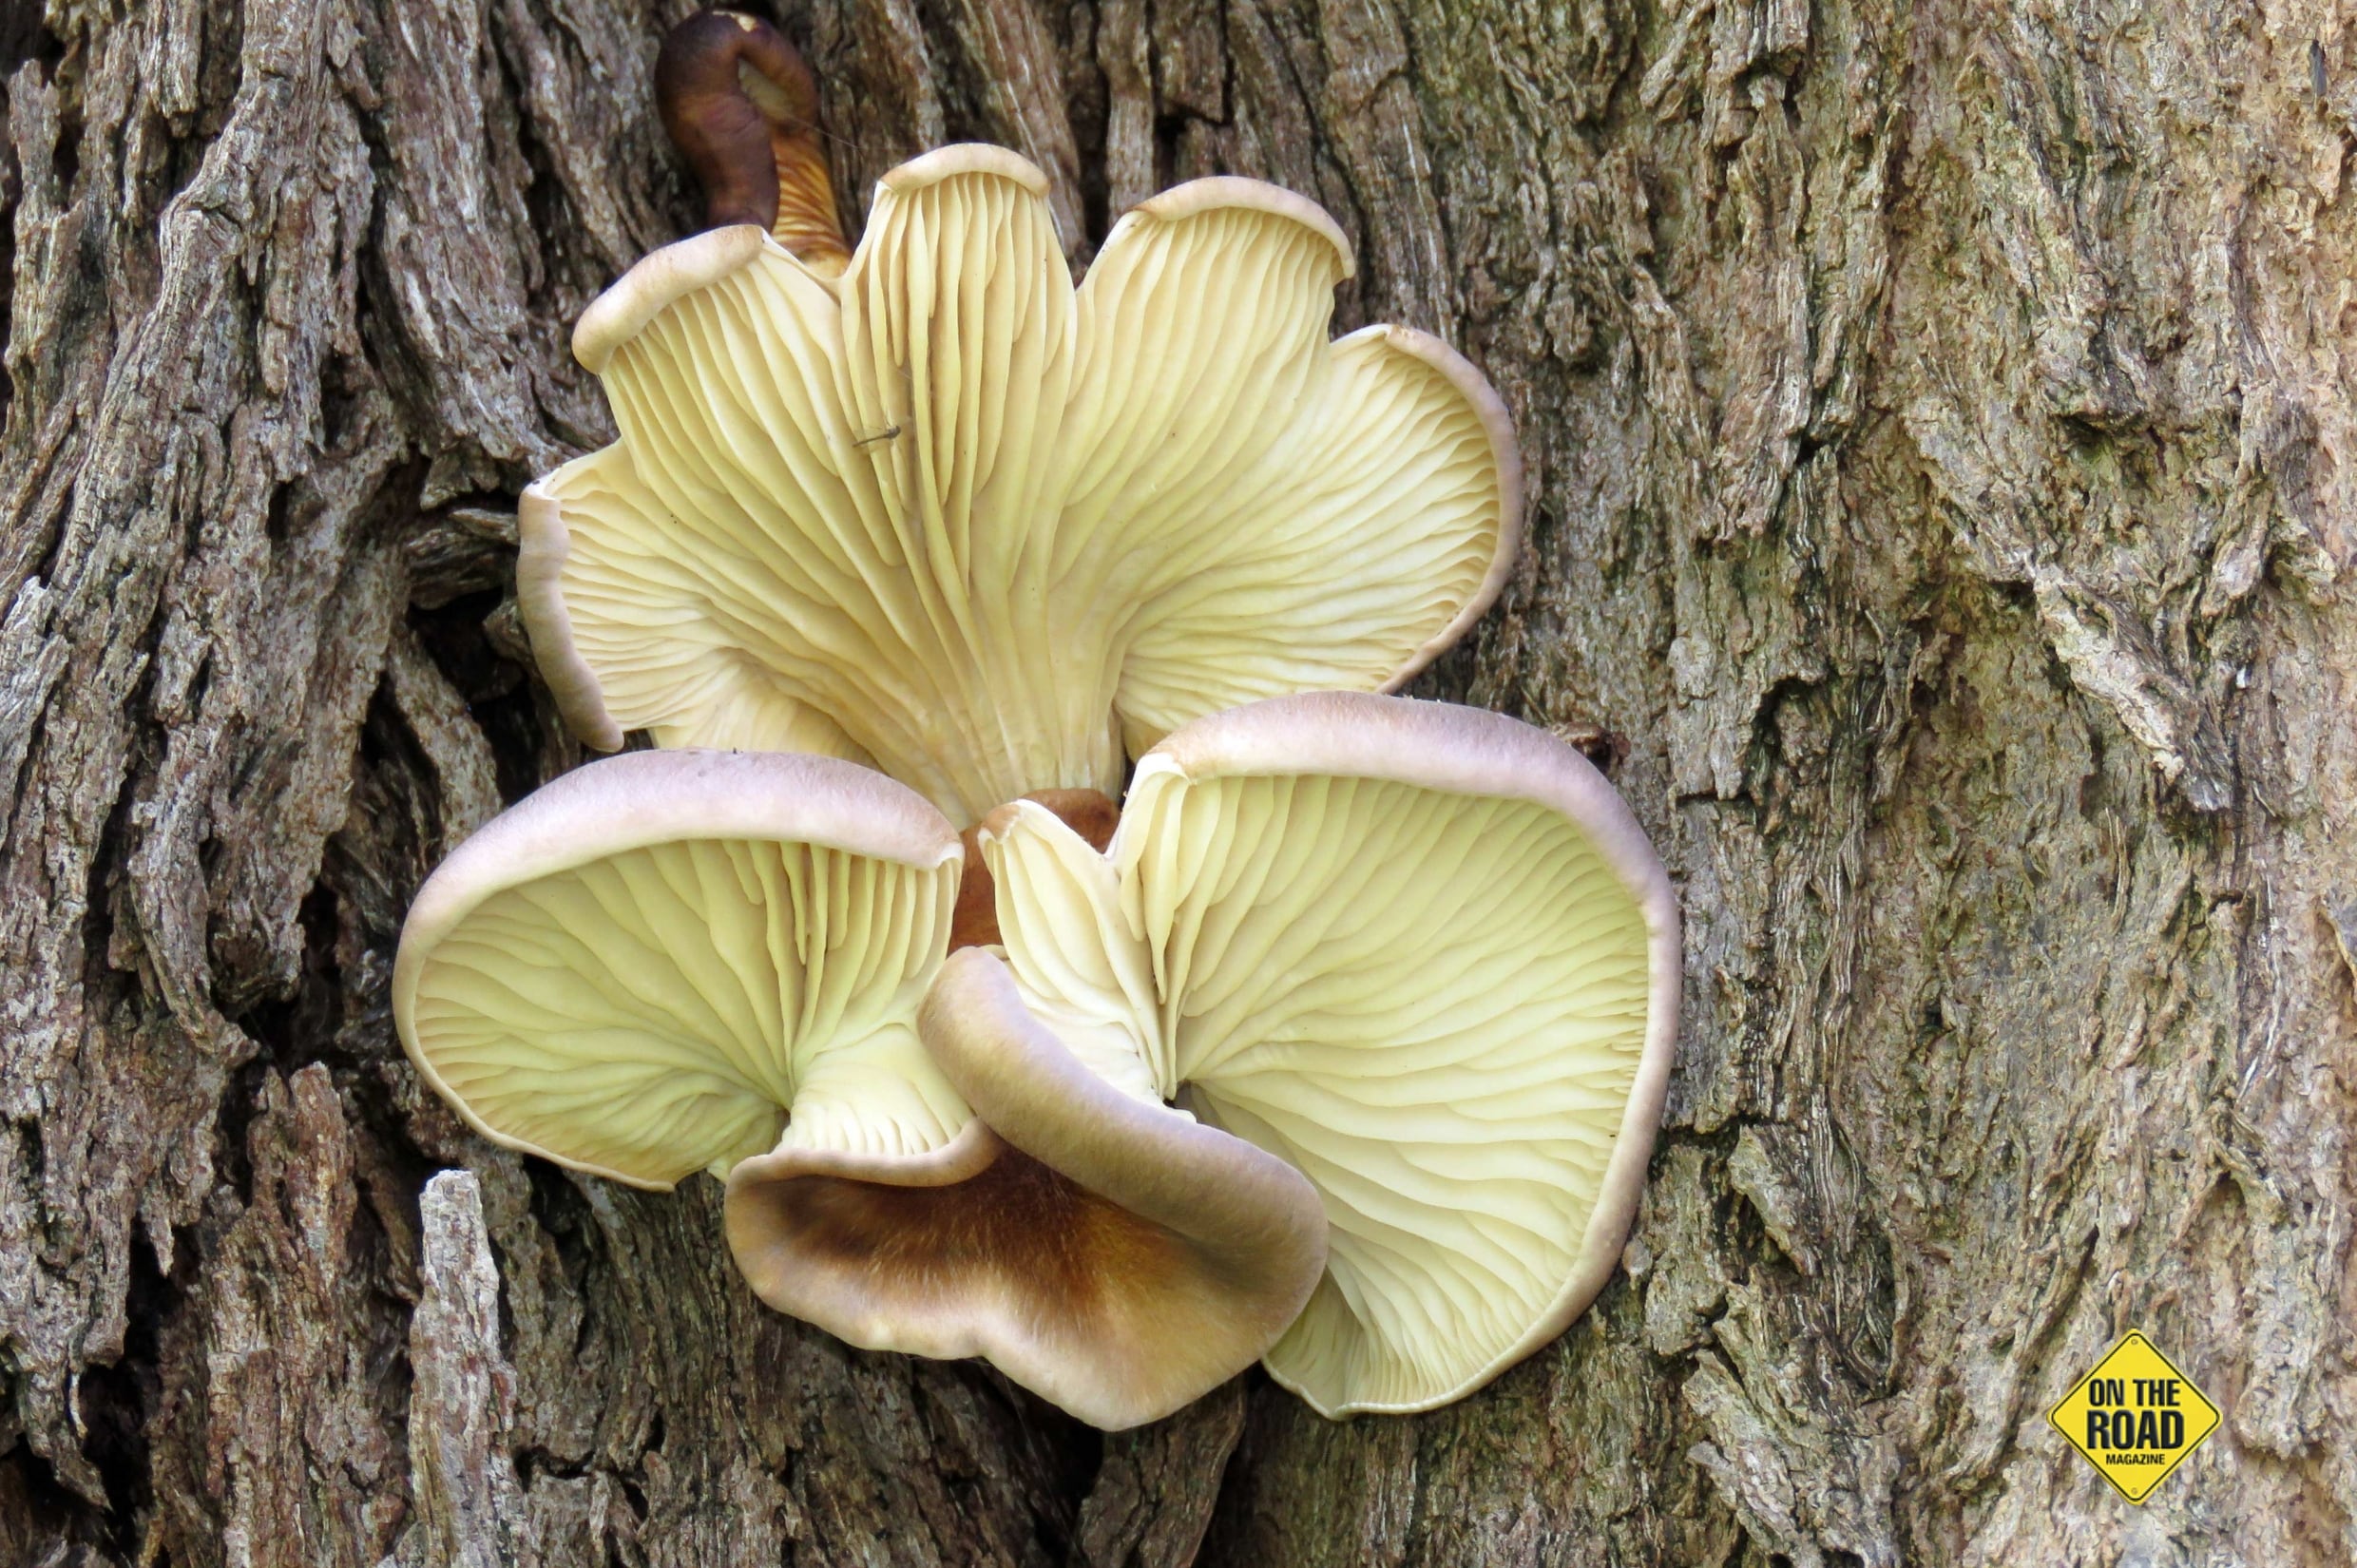 Gills beneath the cap of many fungi produce microscopic spores, which are a form of asexual reproduction.